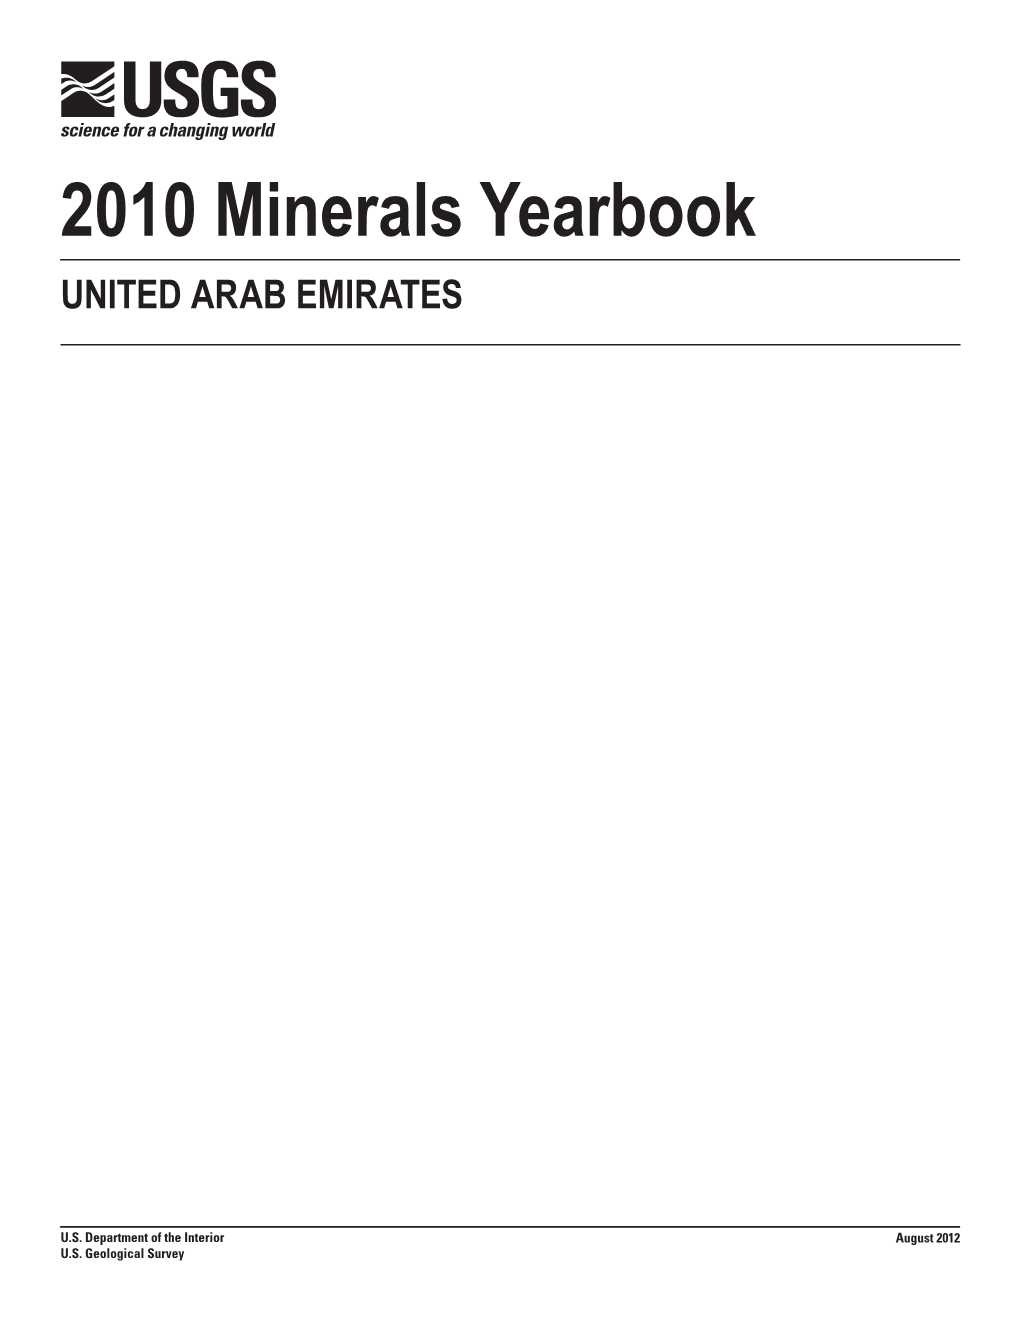 The Mineral Industry of the United Arab Emirates in 2010